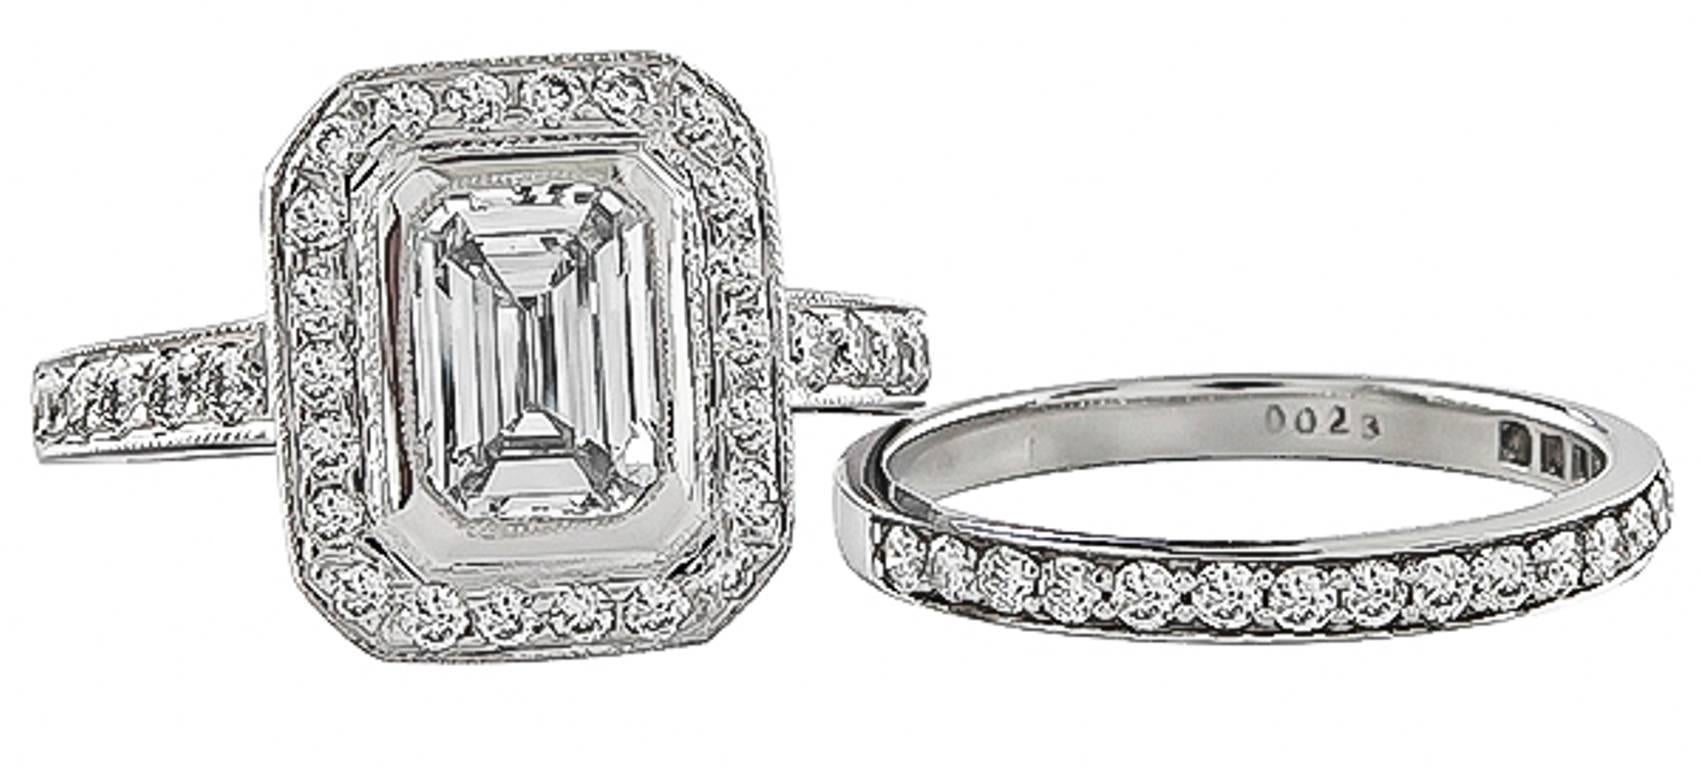 This stunning 18k white gold engagement ring centers a sparkling GIA certified emerald cut diamond that weighs 1.01ct. graded G color with VVS2 clarity. The center diamond and the wedding band is accentuated by dazzling round cut diamonds that weigh